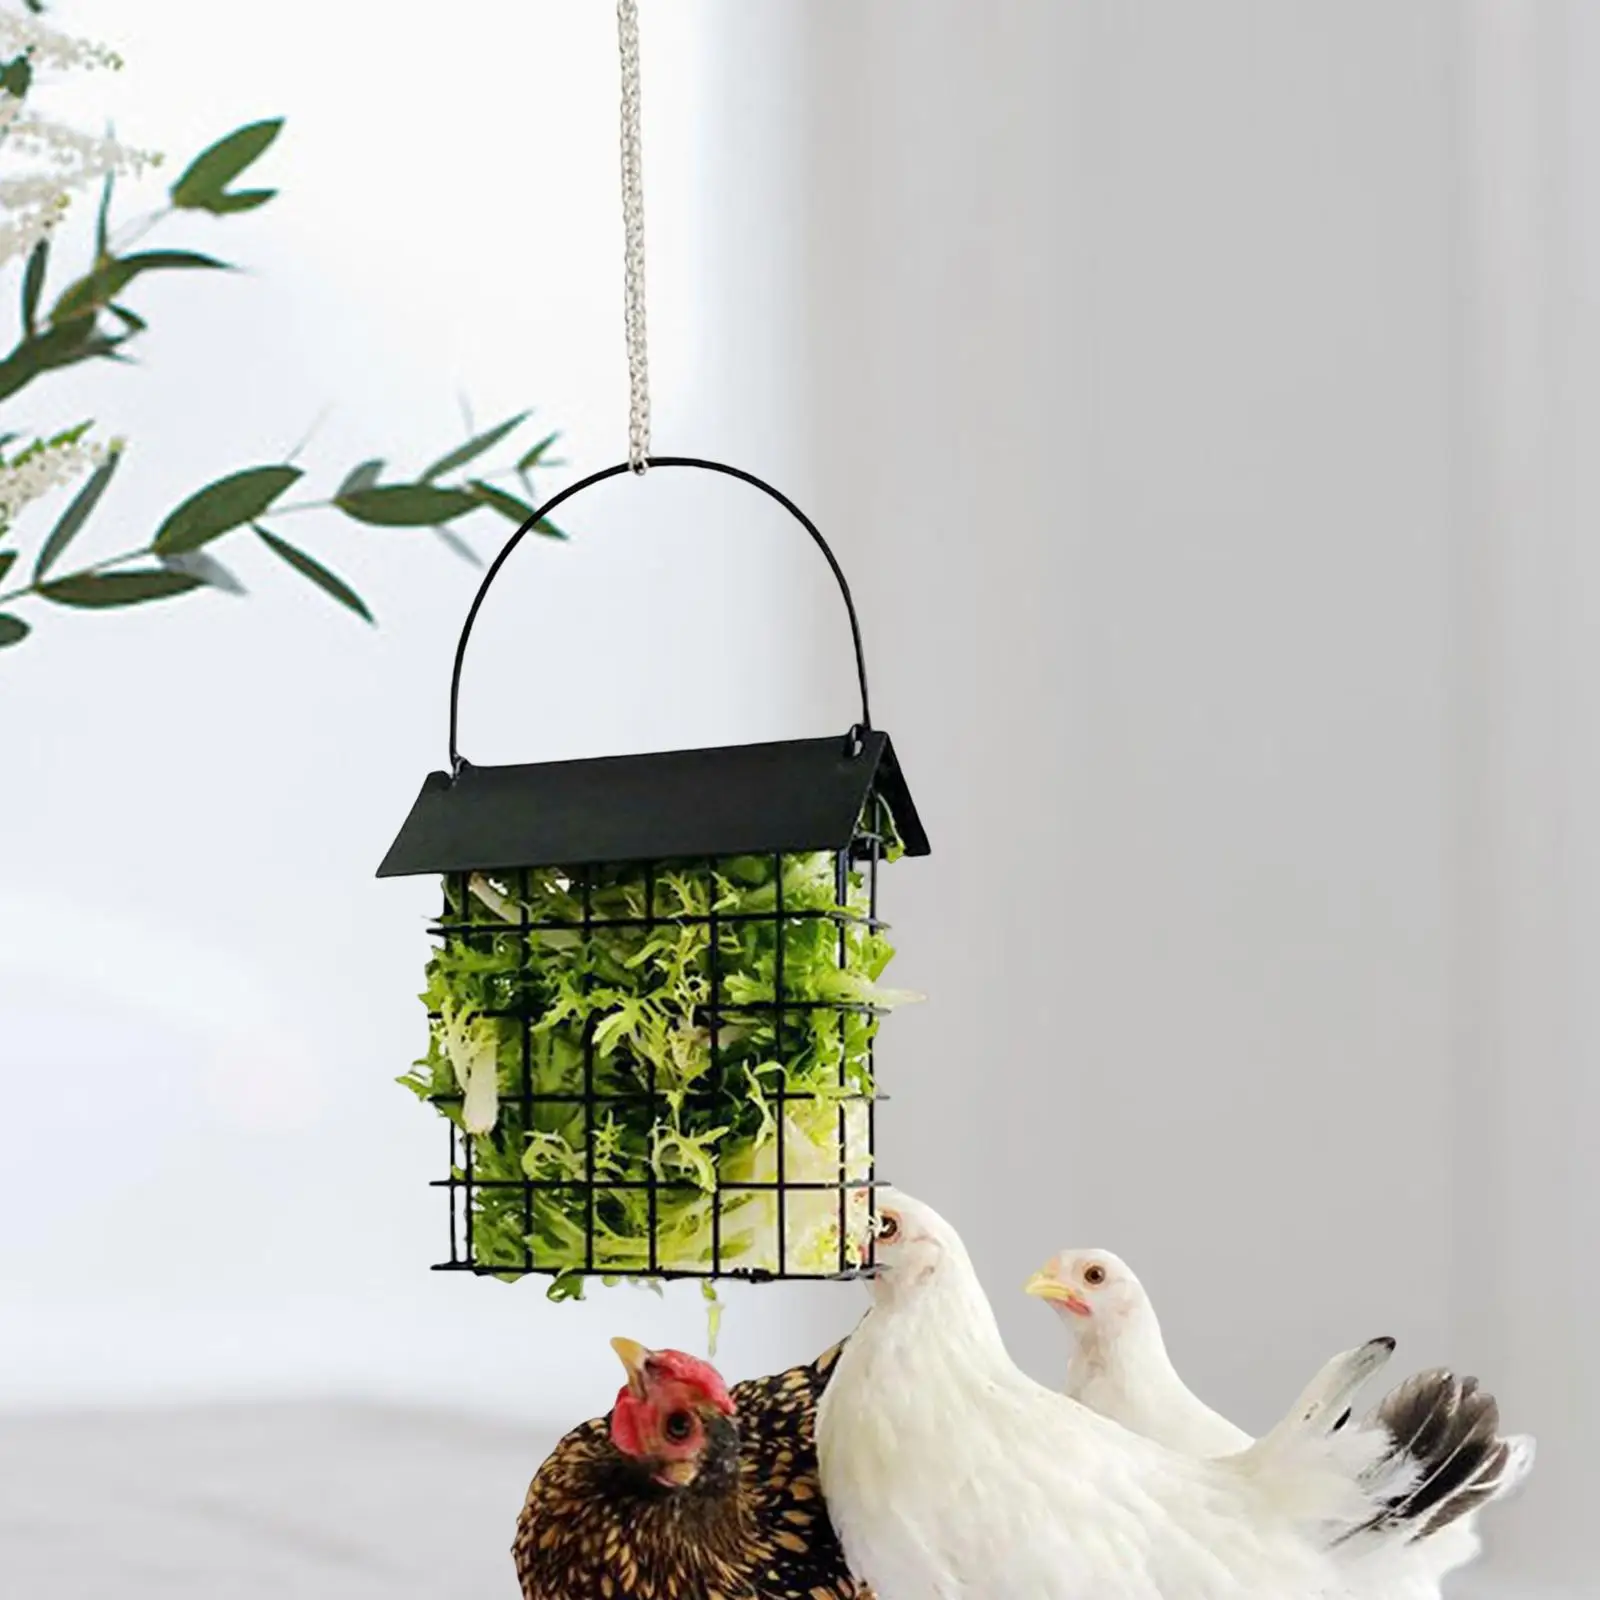 Suet Cake Bird Feeders Hanging Feeder for Hens Chicken Toy Treat Feeding Tool Poultry Fruit Holde for Cabbage Lettuce Veggies